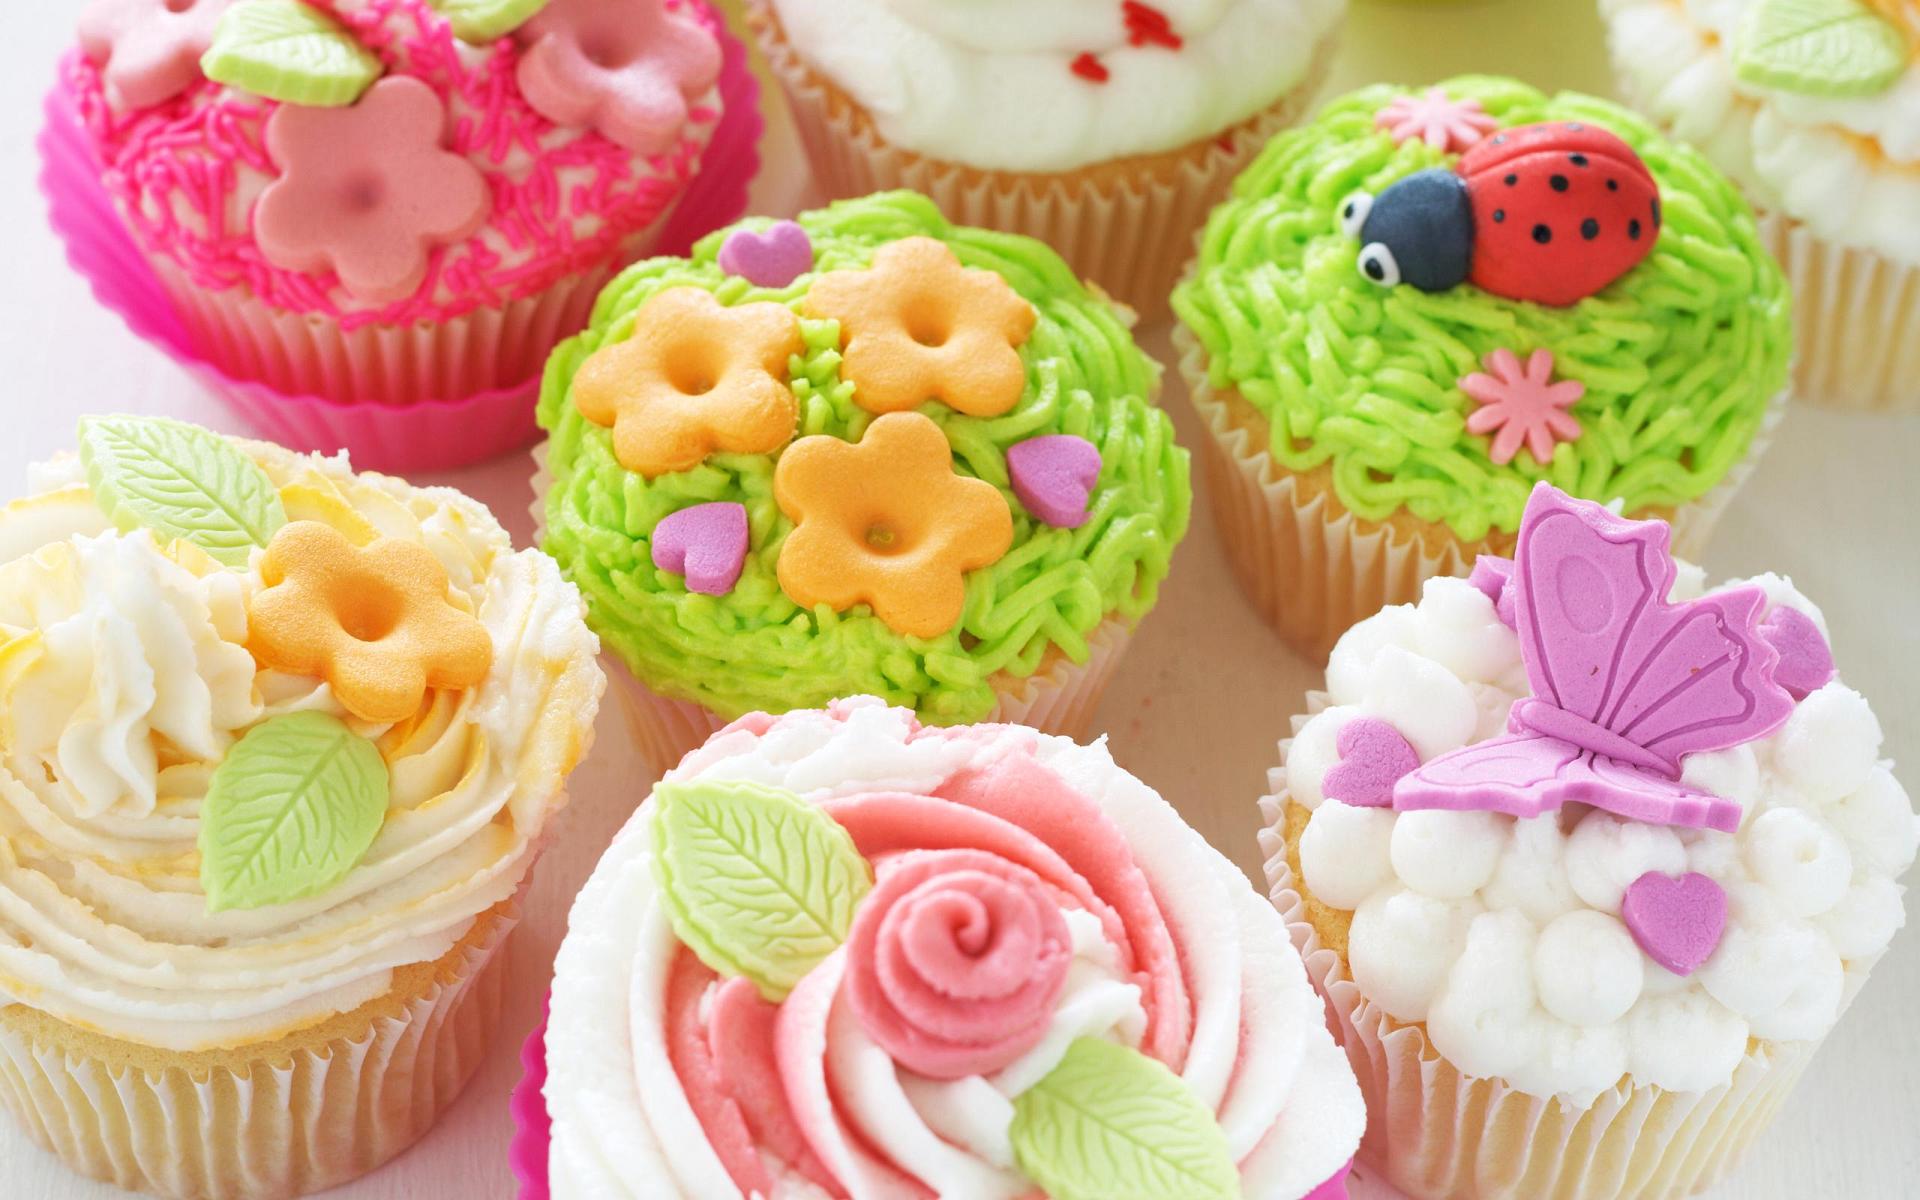 Wallpaper Cupcakes - 1920 x 1200 - Food Drinks Cocktails Cake Meat